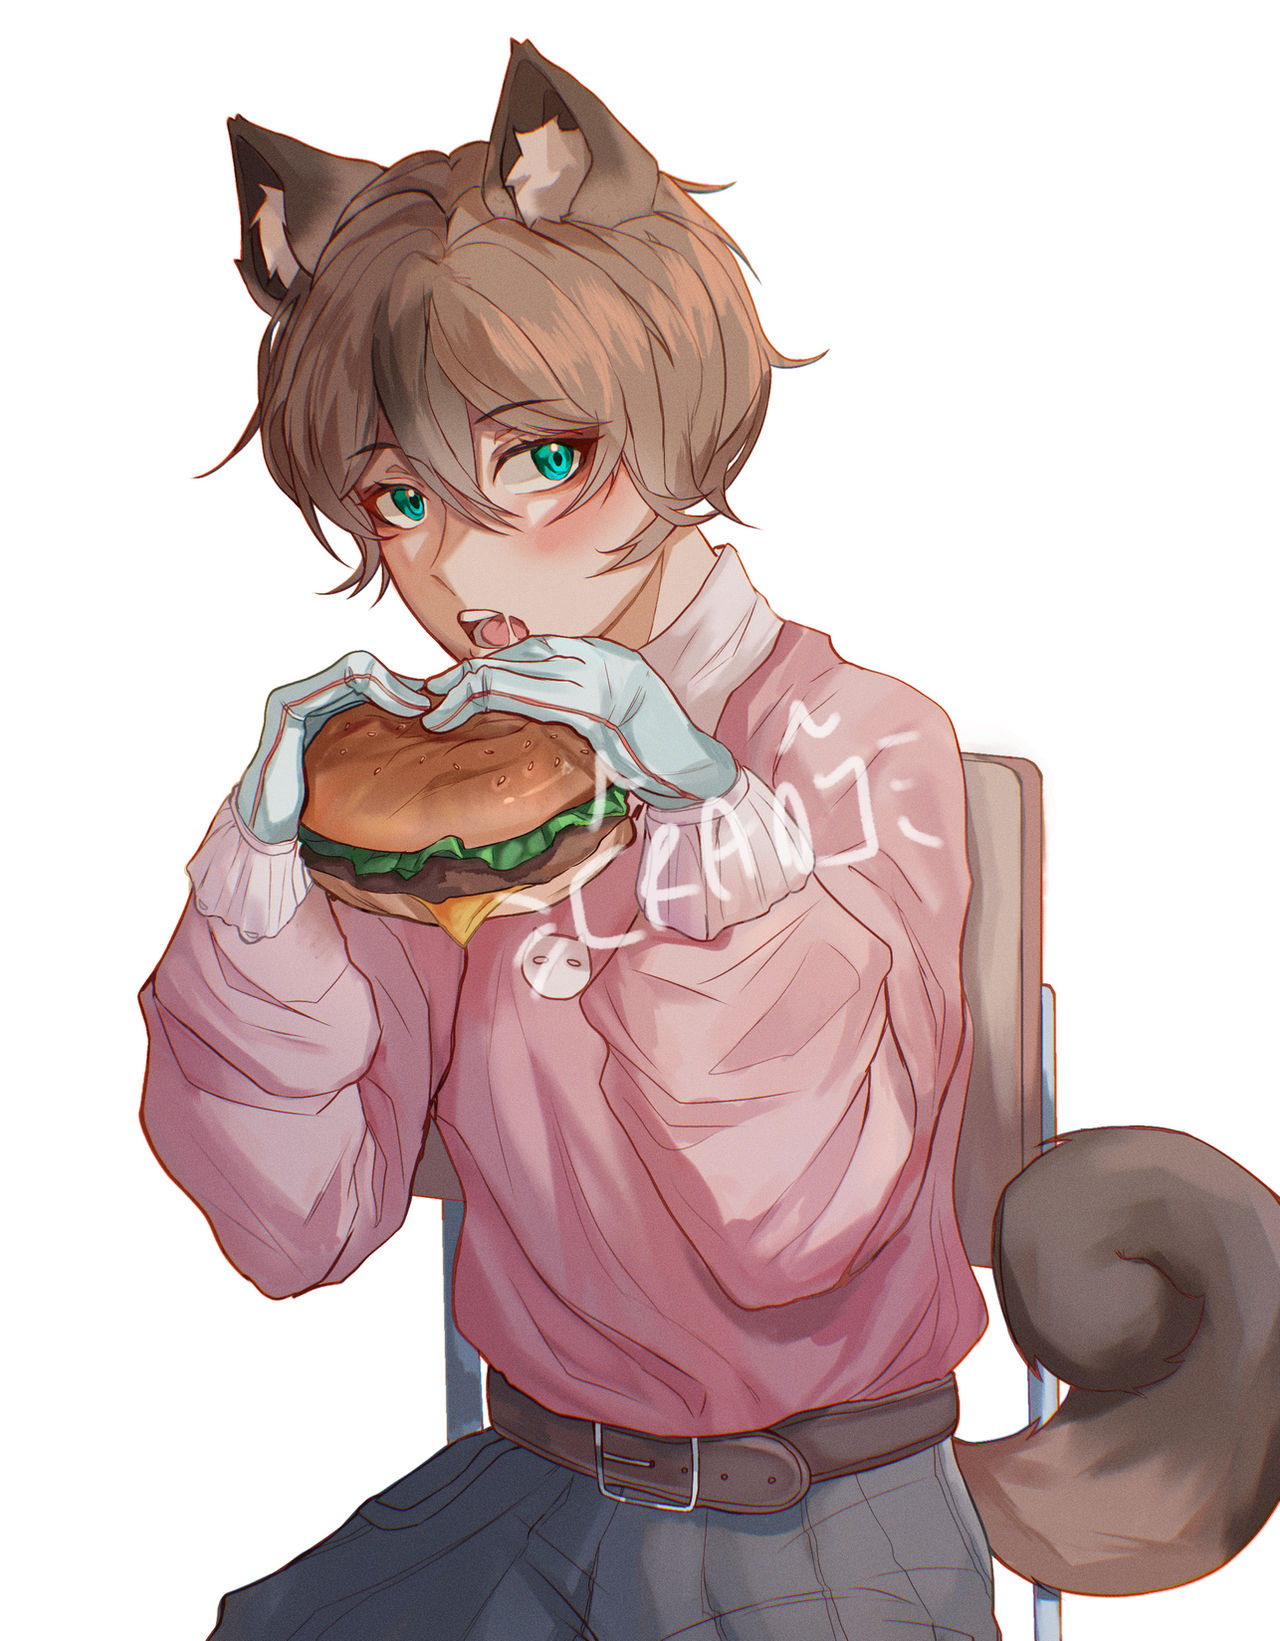 OC] Eating a burger by Kraome on DeviantArt